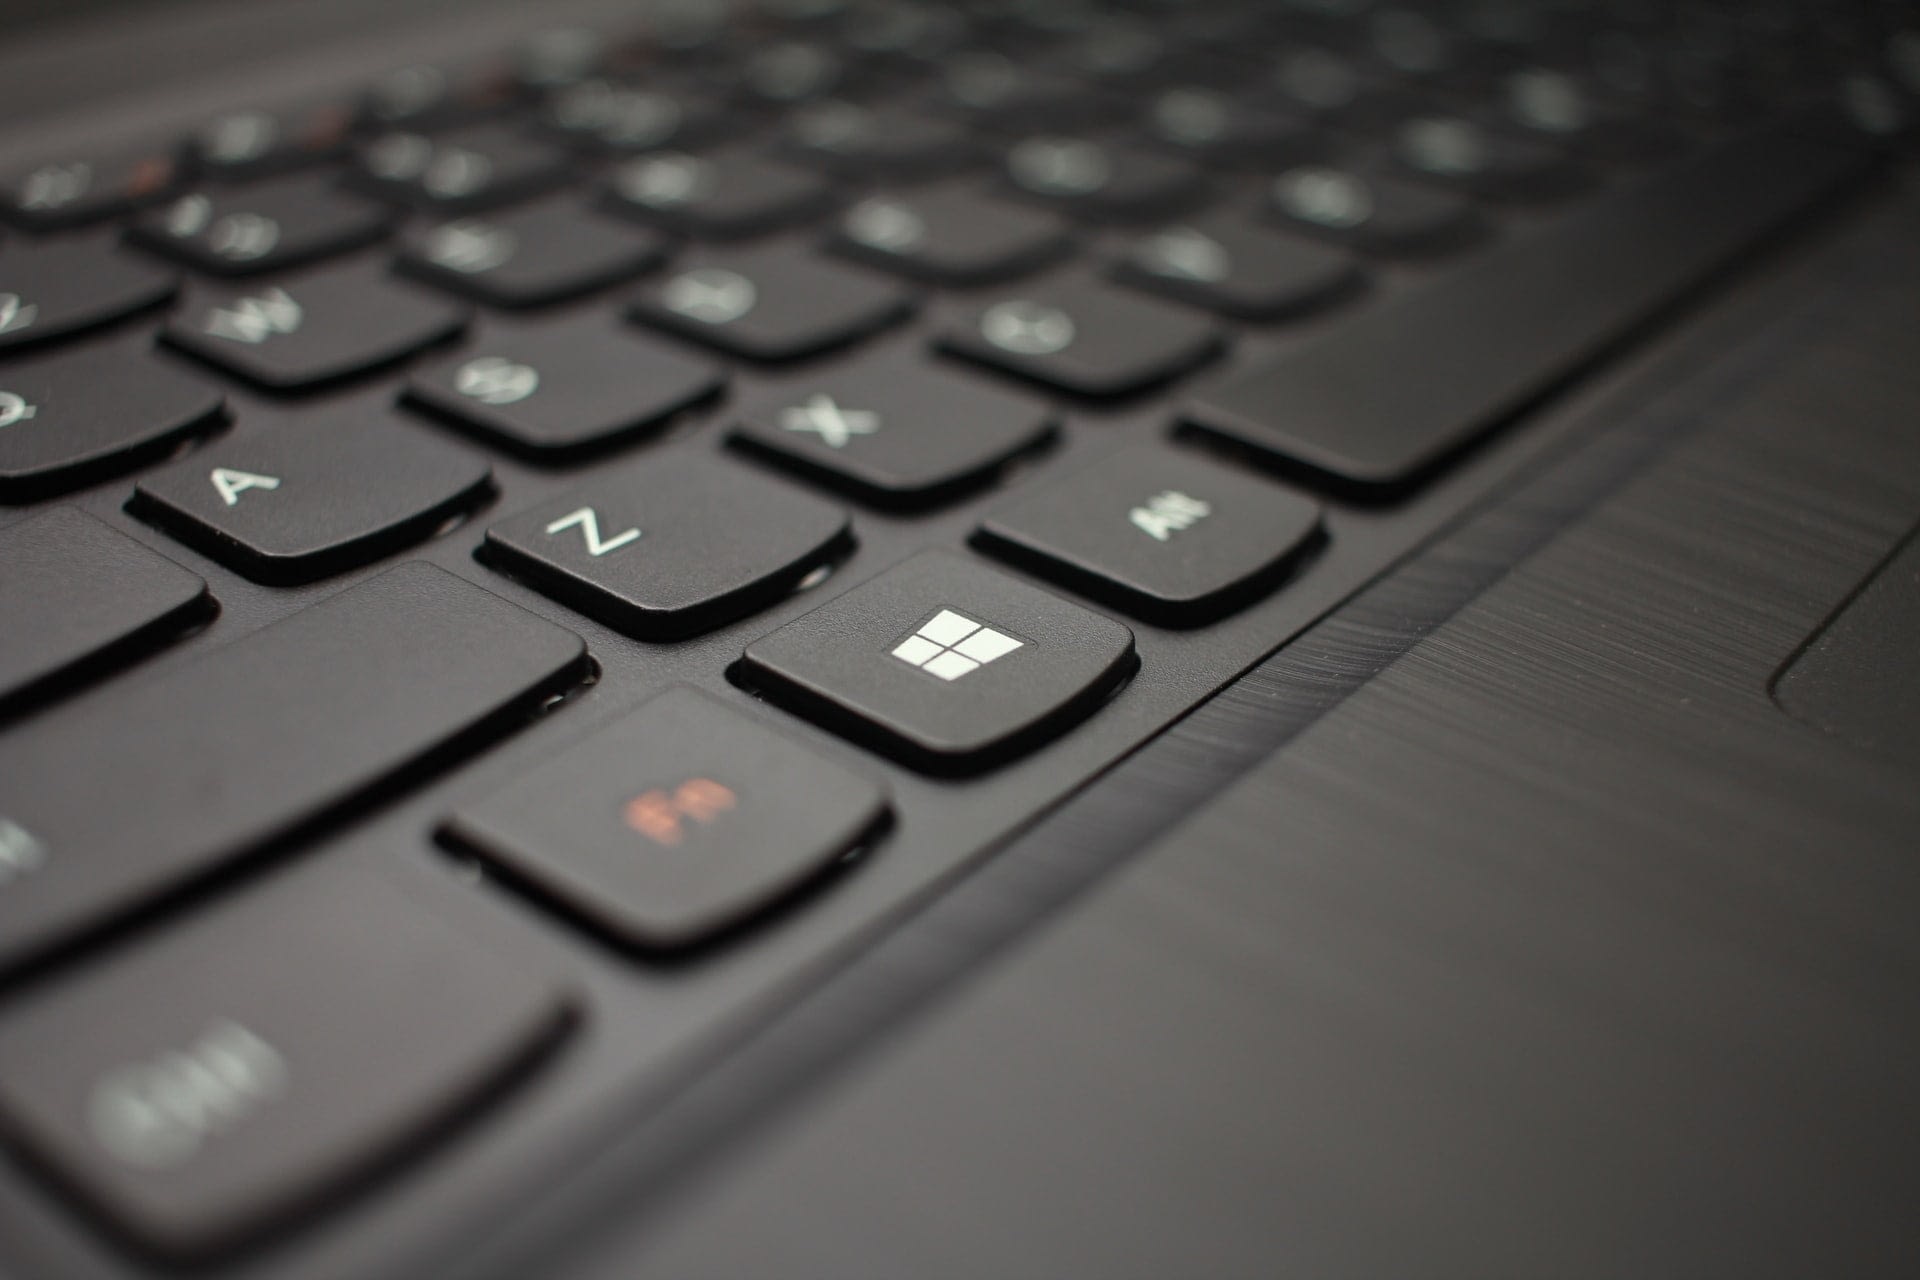 how to disable your laptop keyboard